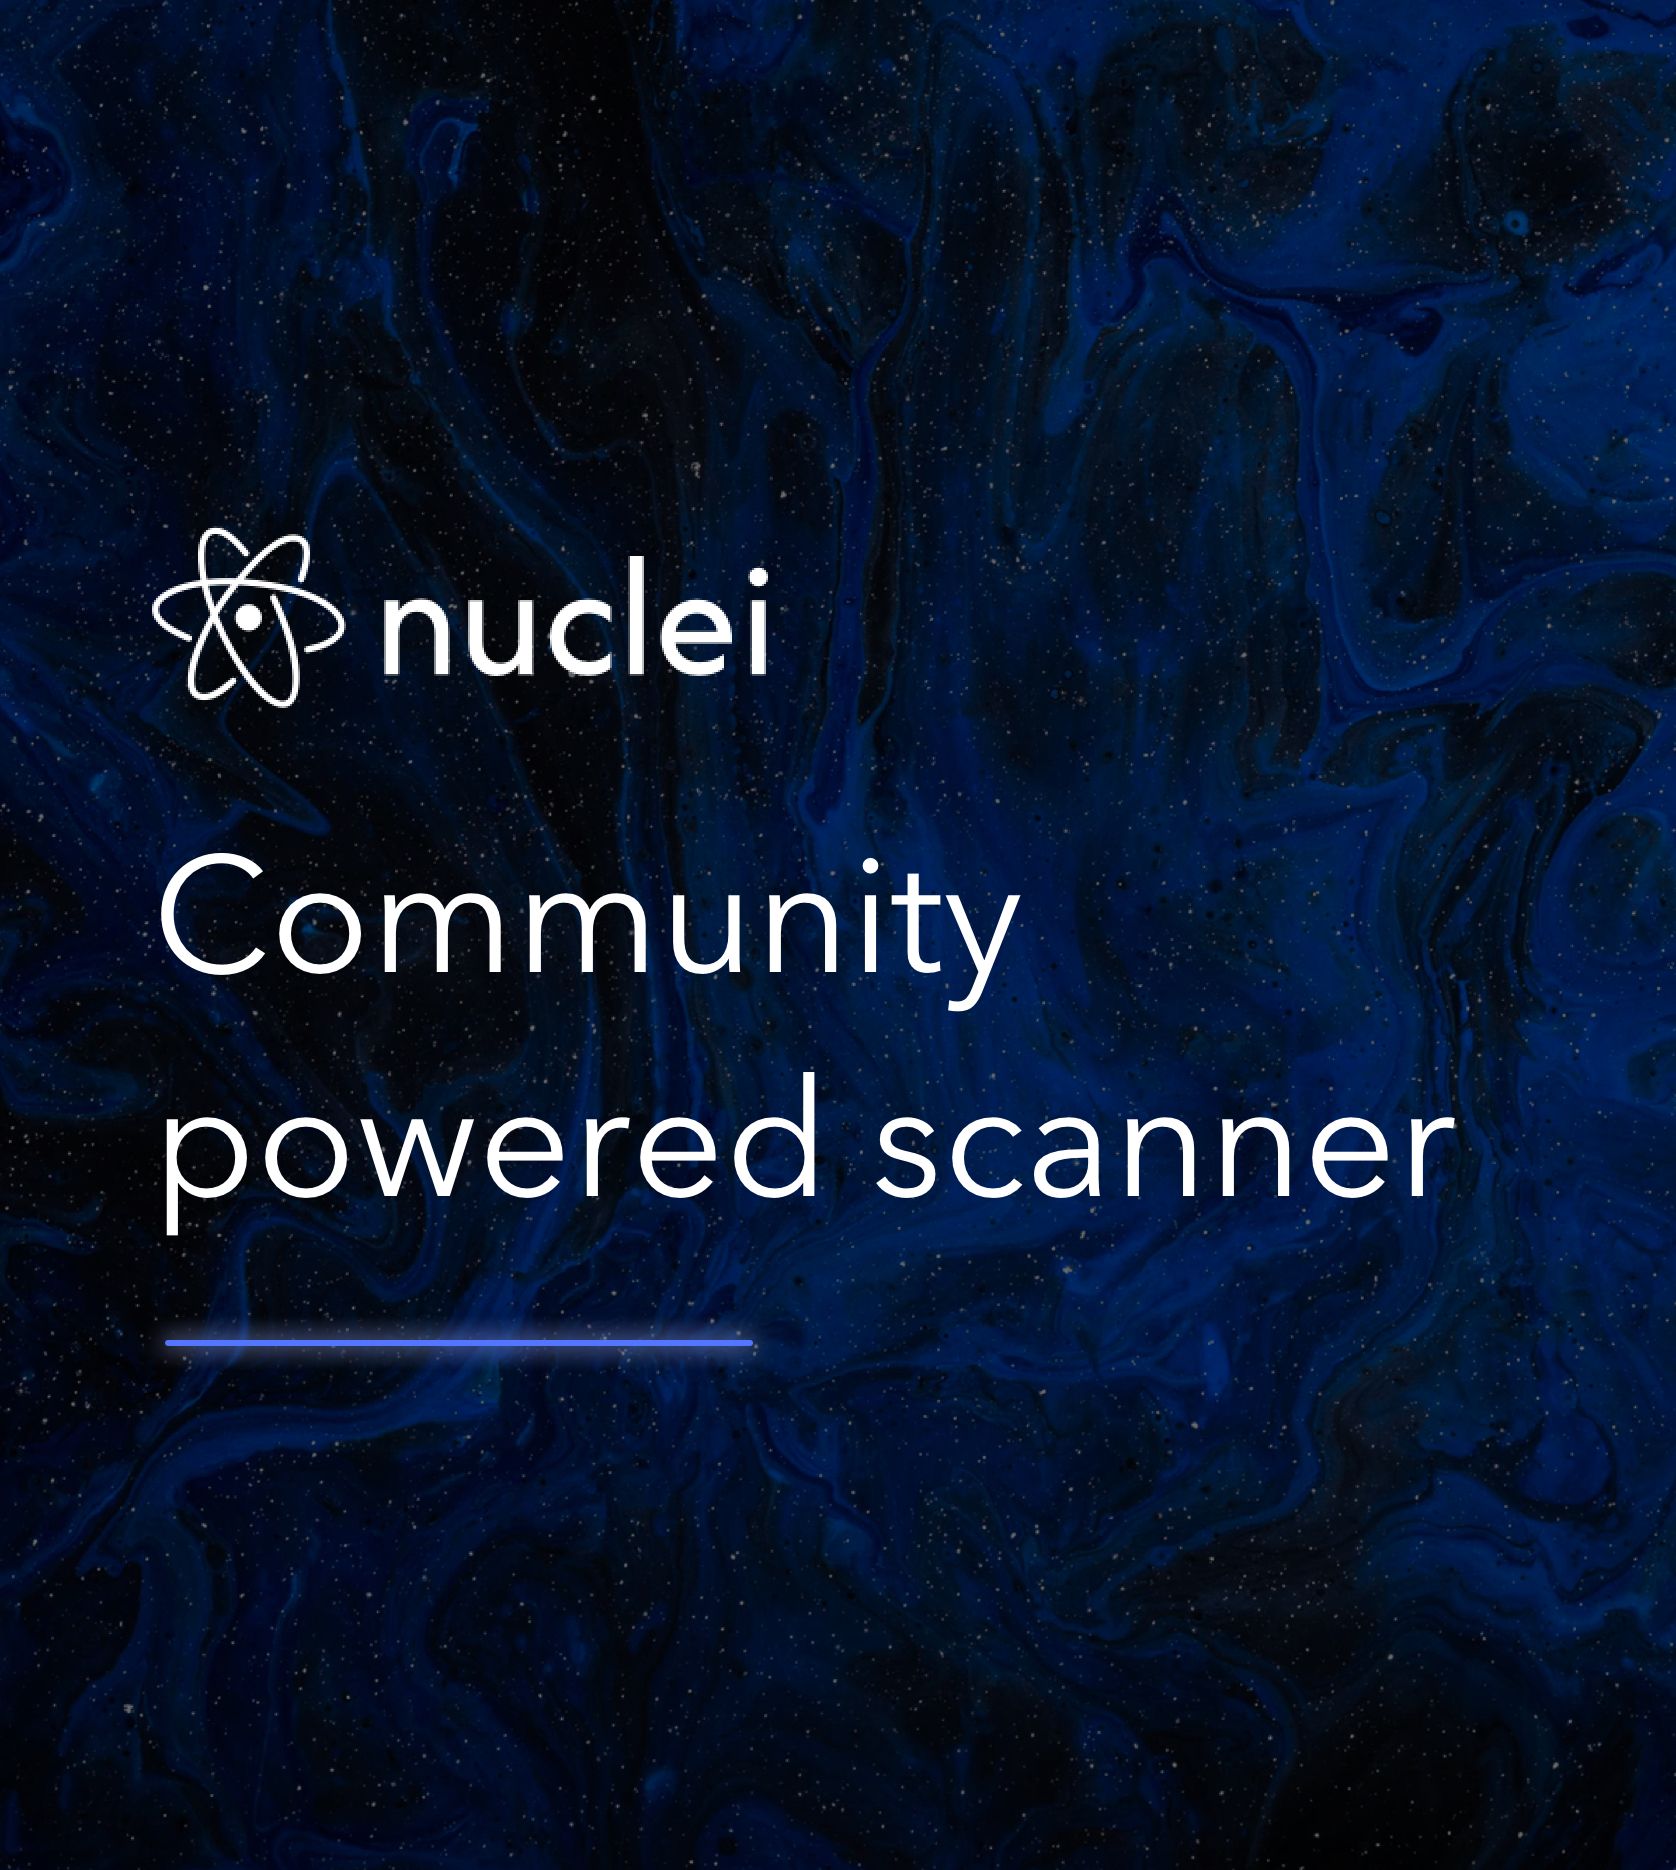 Community-powered scanning with Nuclei